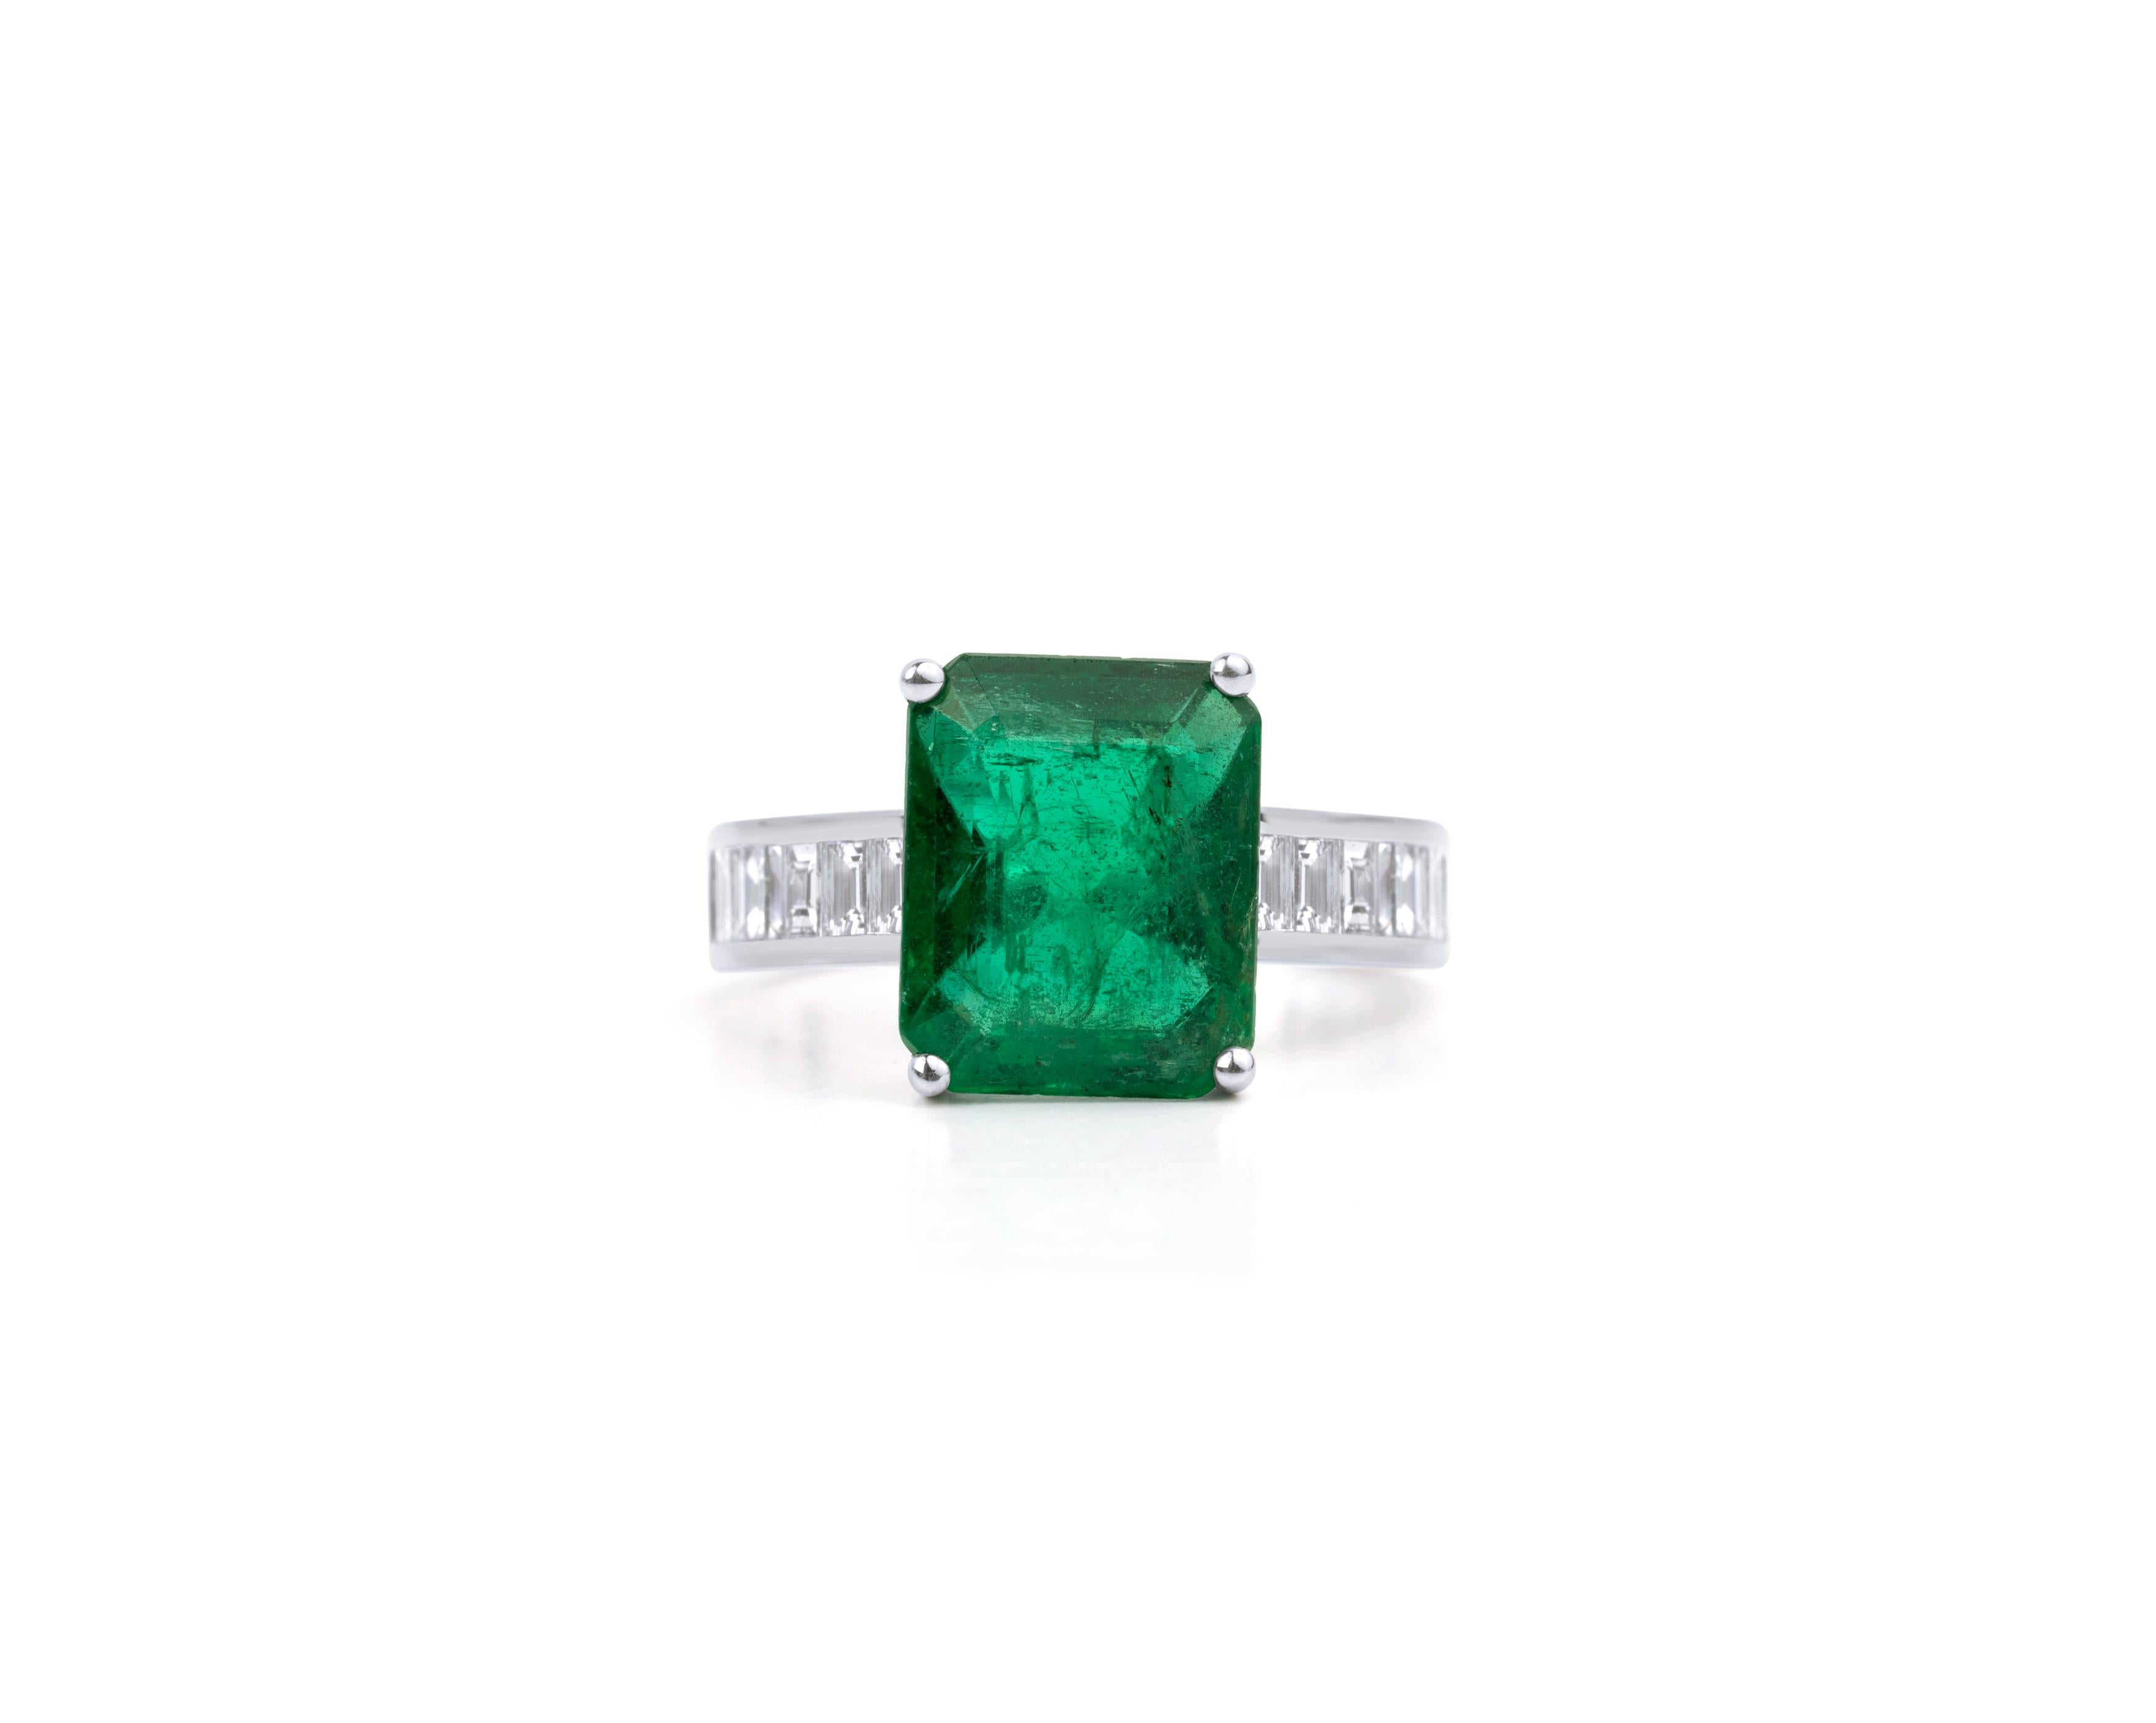 4.5 Carat Natural Emerald Diamond Cocktail Engagement Ring 18k White Gold

Available in 18k white gold.

Same design can be made also with other custom gemstones per request.

Product details:

- Solid gold

- Diamond - approx. 0.95 carat

- Emerald